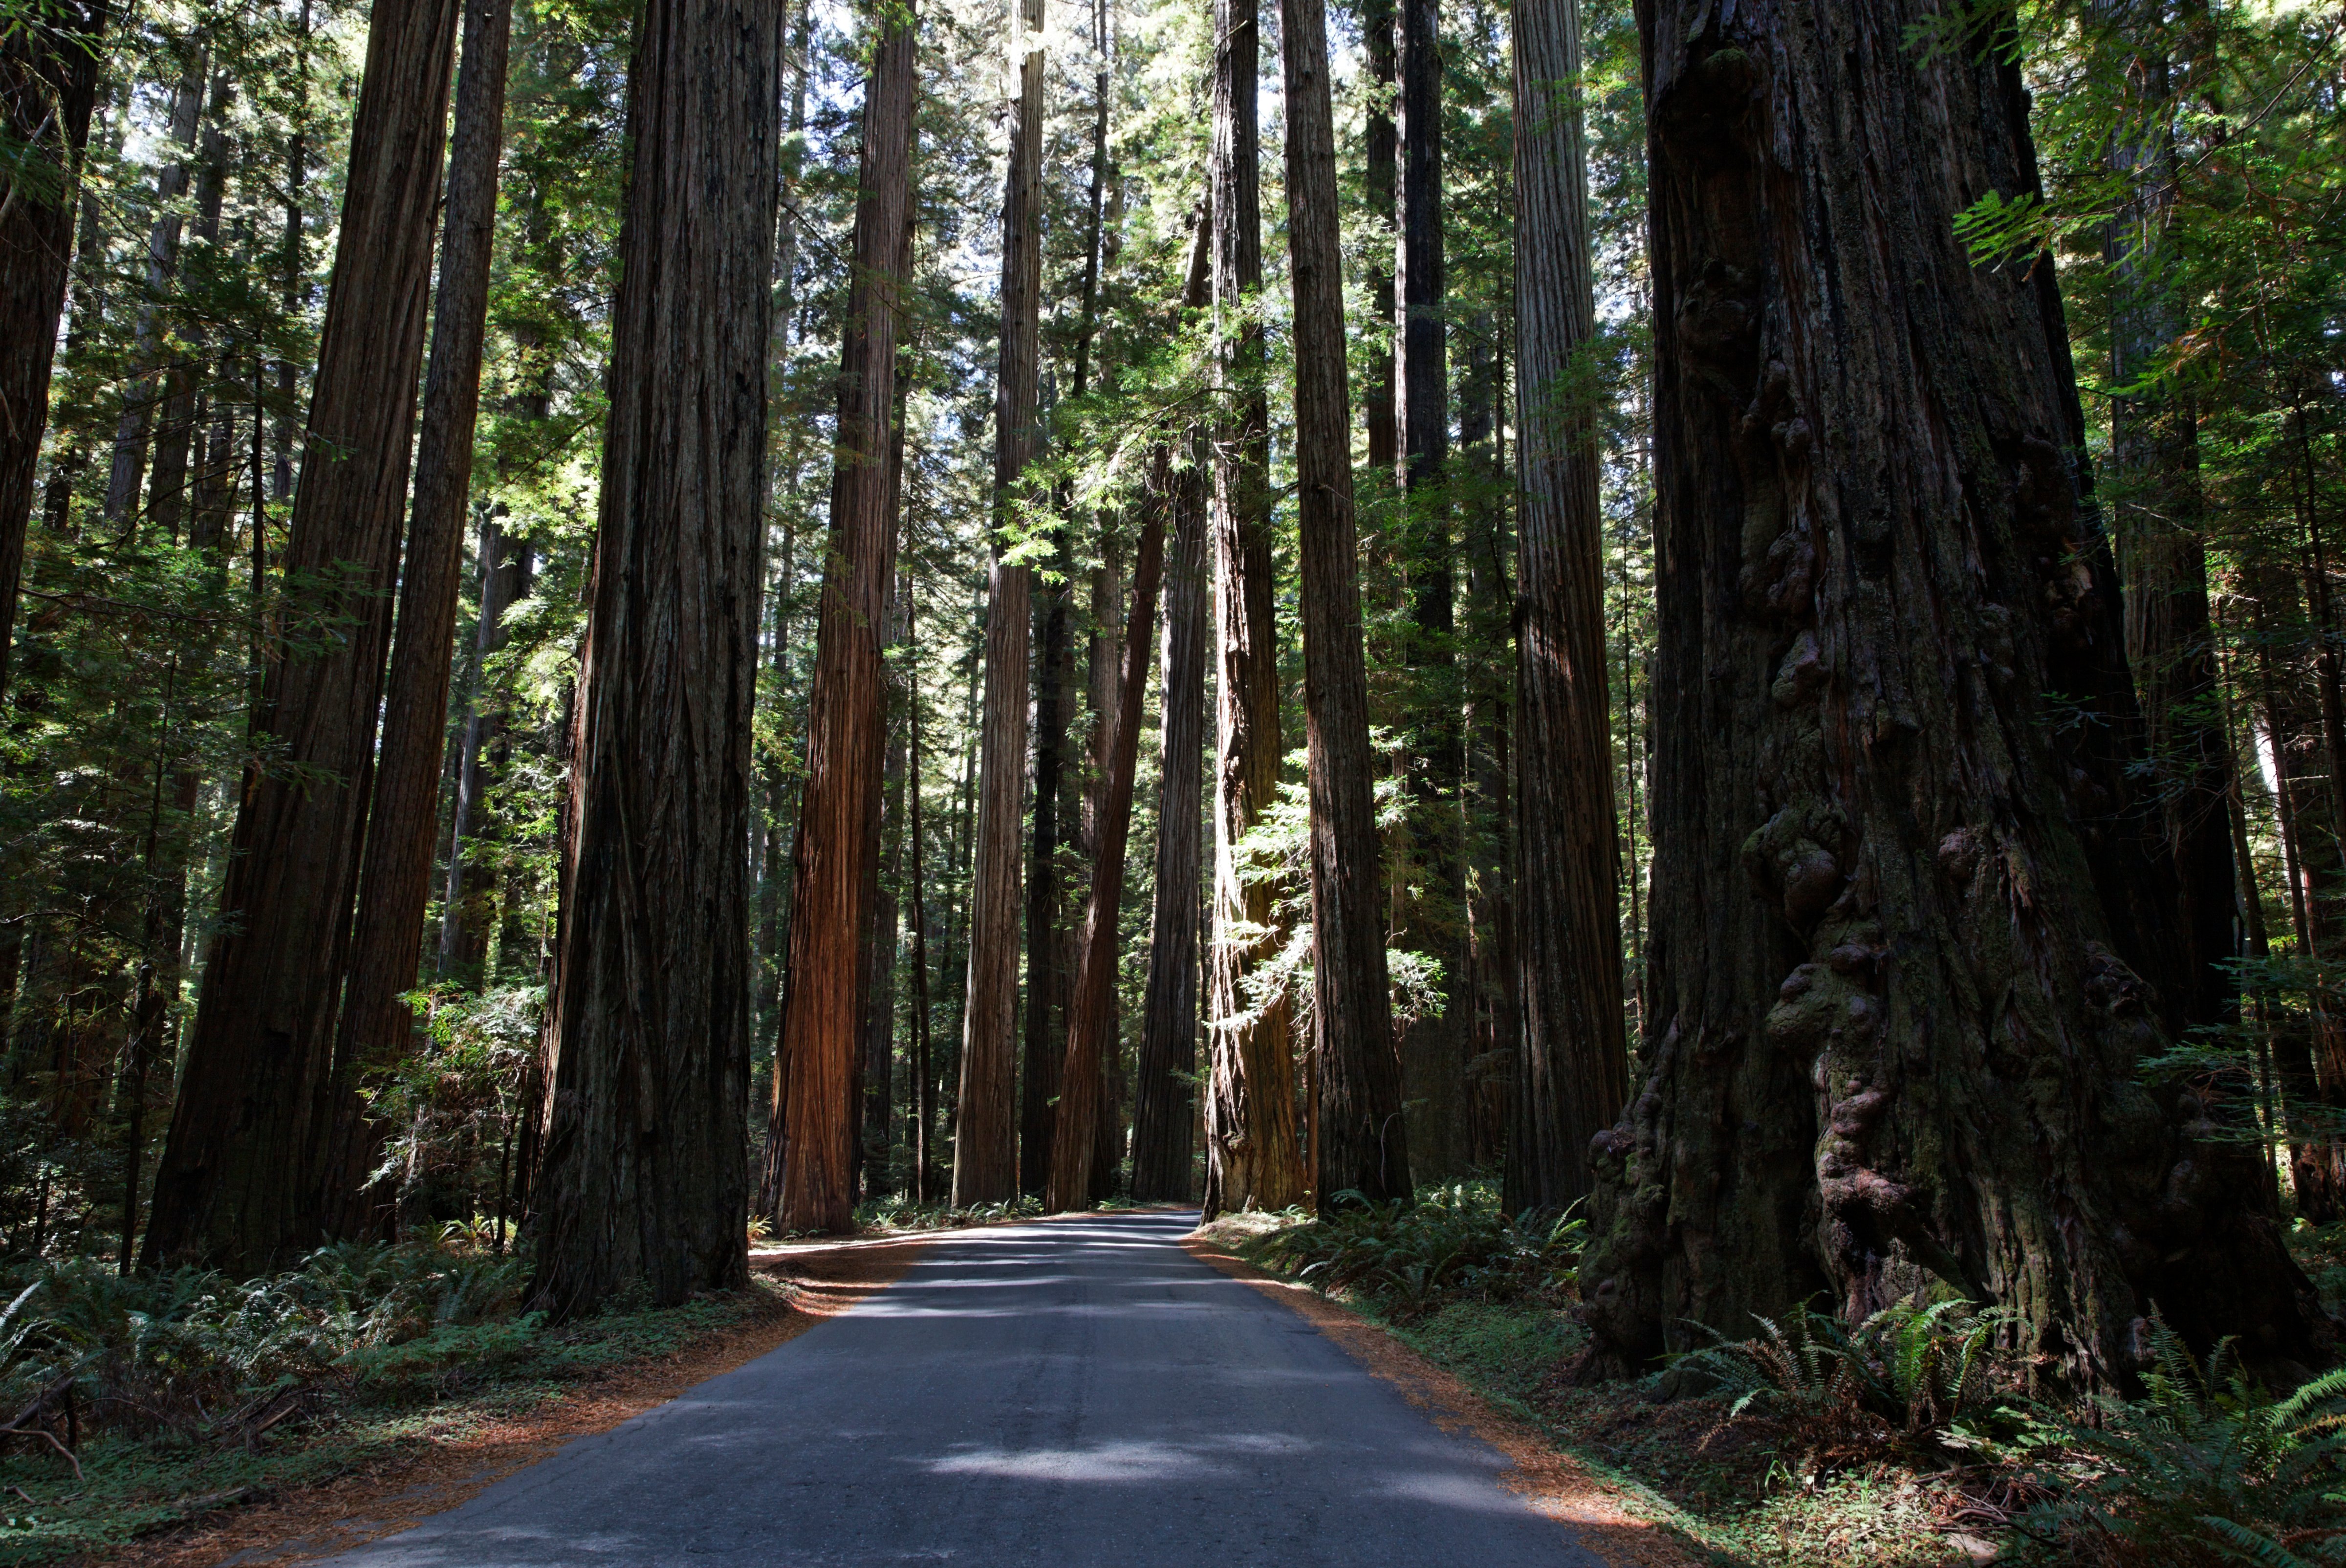 Road through Humboldt Redwoods State Park, in California's Humboldt County, on Sept. 1, 2011 (JTB Photo/UIG/Getty Images)